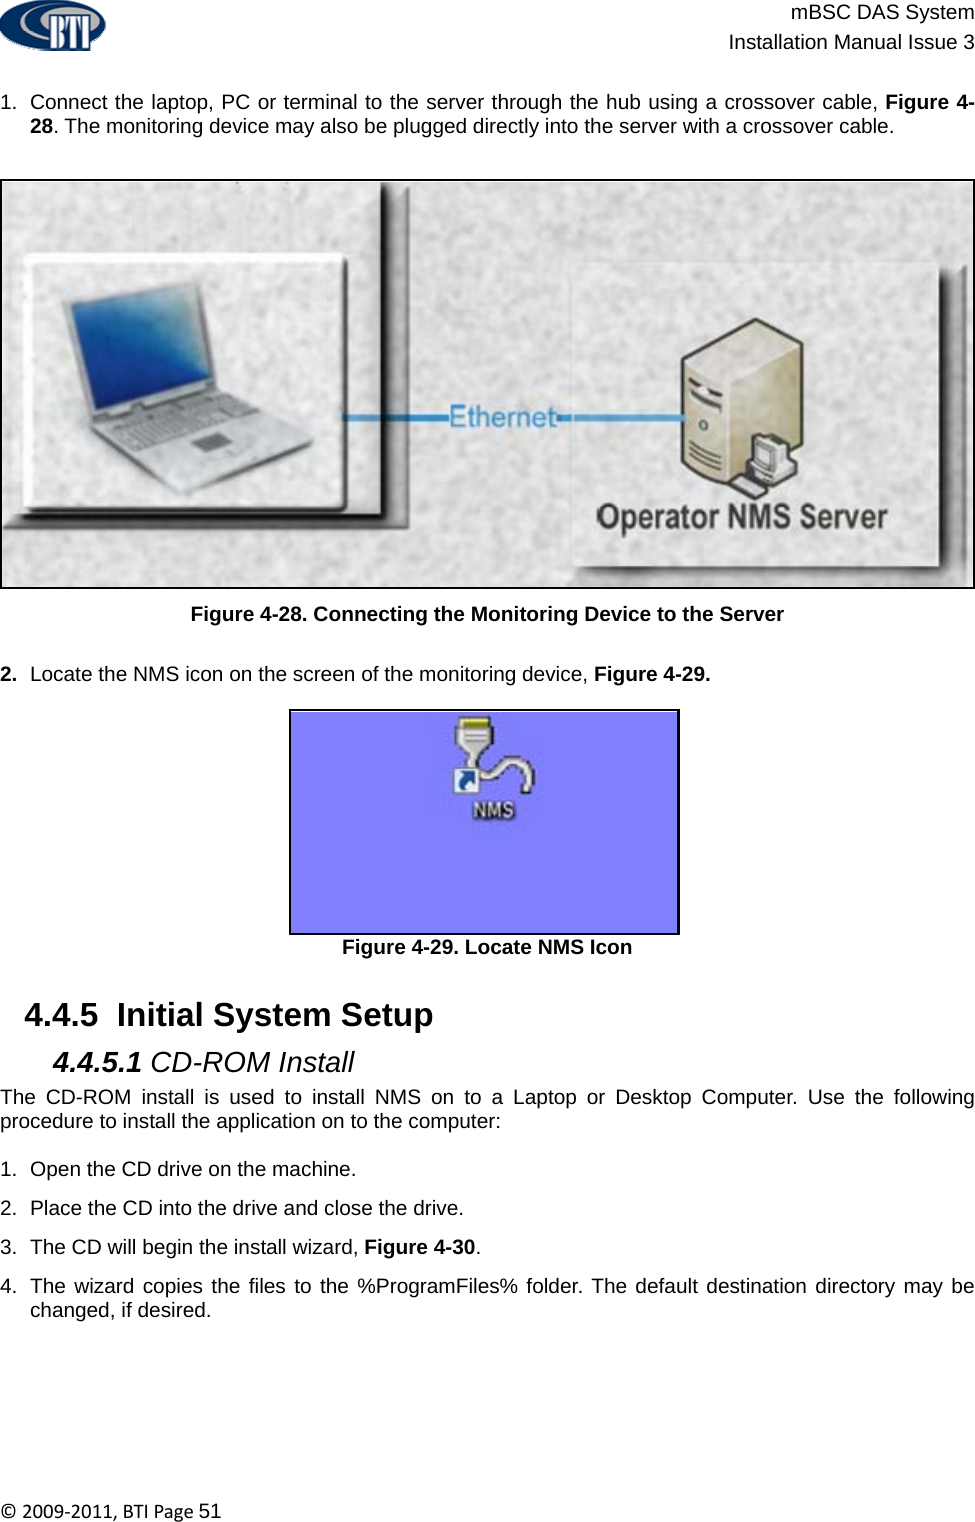                          mBSC DAS System  Installation Manual Issue 3  ©2009‐2011,BTIPage51  1.  Connect the laptop, PC or terminal to the server through the hub using a crossover cable, Figure 4-28. The monitoring device may also be plugged directly into the server with a crossover cable.  Figure 4-28. Connecting the Monitoring Device to the Server  2.  Locate the NMS icon on the screen of the monitoring device, Figure 4-29. Figure 4-29. Locate NMS Icon   4.4.5  Initial System Setup  4.4.5.1 CD-ROM Install The CD-ROM install is used to install NMS on to a Laptop or Desktop Computer. Use the following procedure to install the application on to the computer:  1.  Open the CD drive on the machine. 2.  Place the CD into the drive and close the drive. 3.  The CD will begin the install wizard, Figure 4-30. 4.  The wizard copies the files to the %ProgramFiles% folder. The default destination directory may be changed, if desired. 